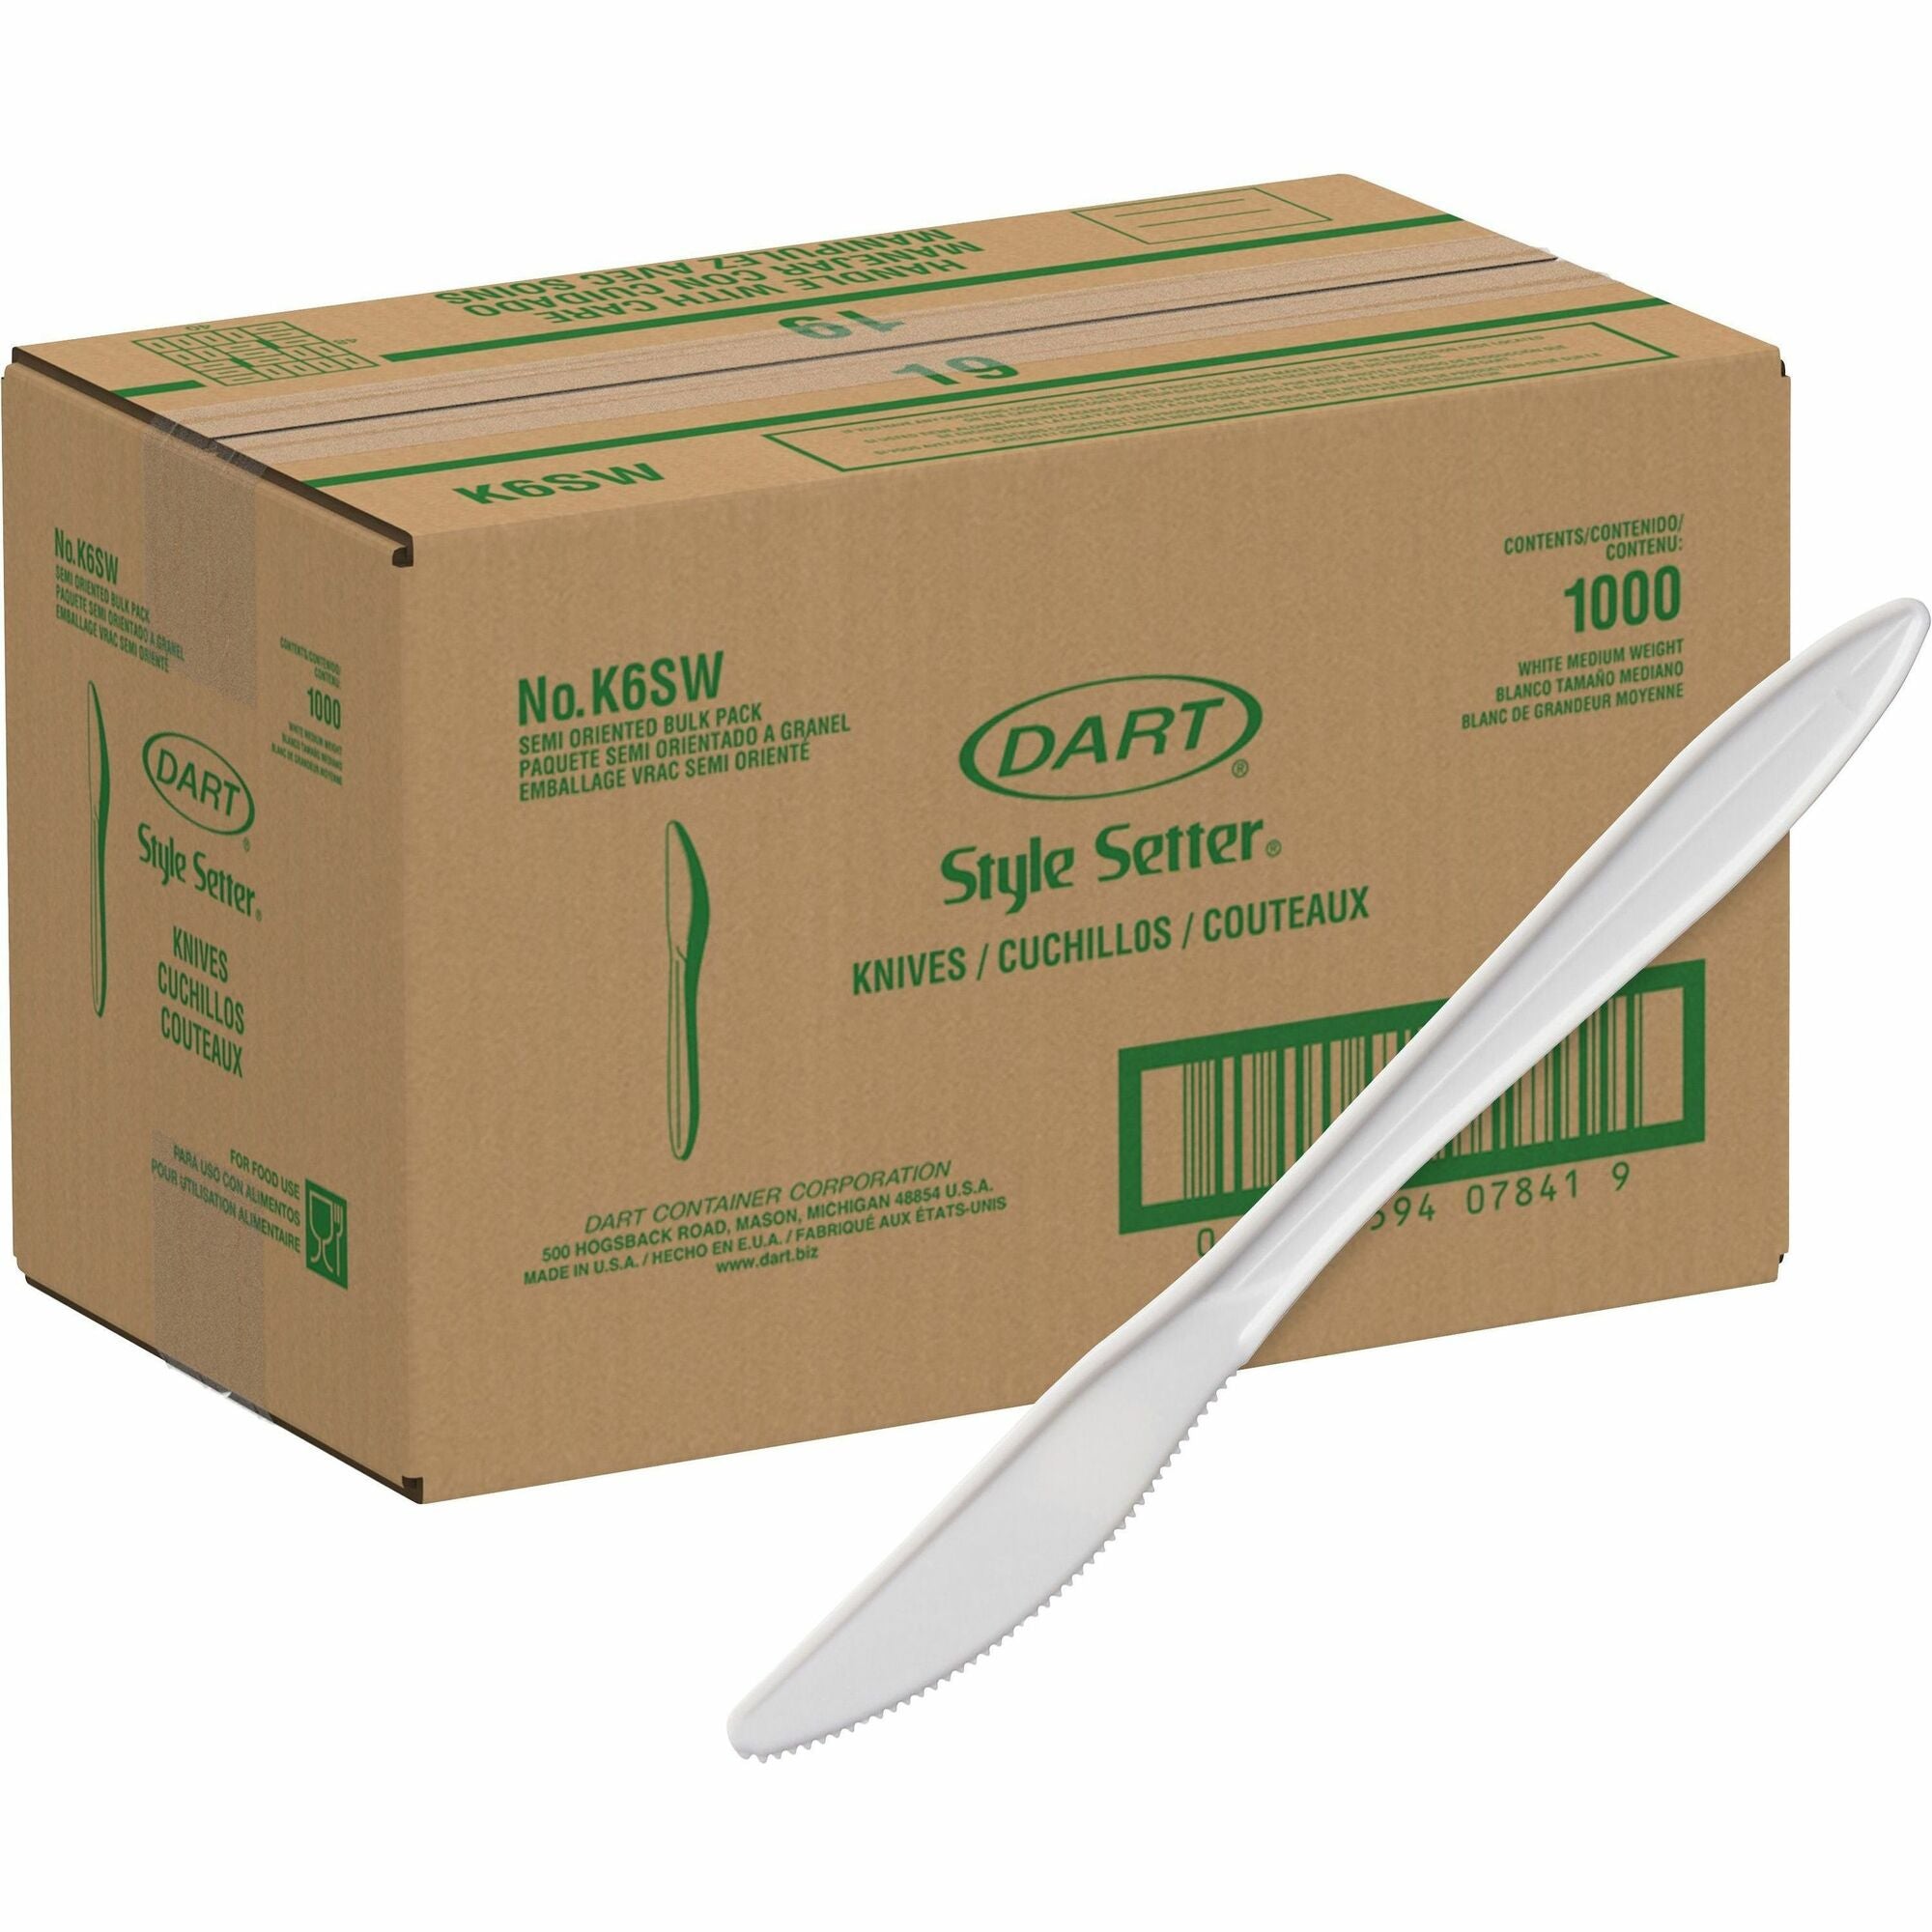 solo-disposable-cutlery-1000-carton-knife-1-x-knife-disposable-white_scck6sw - 1